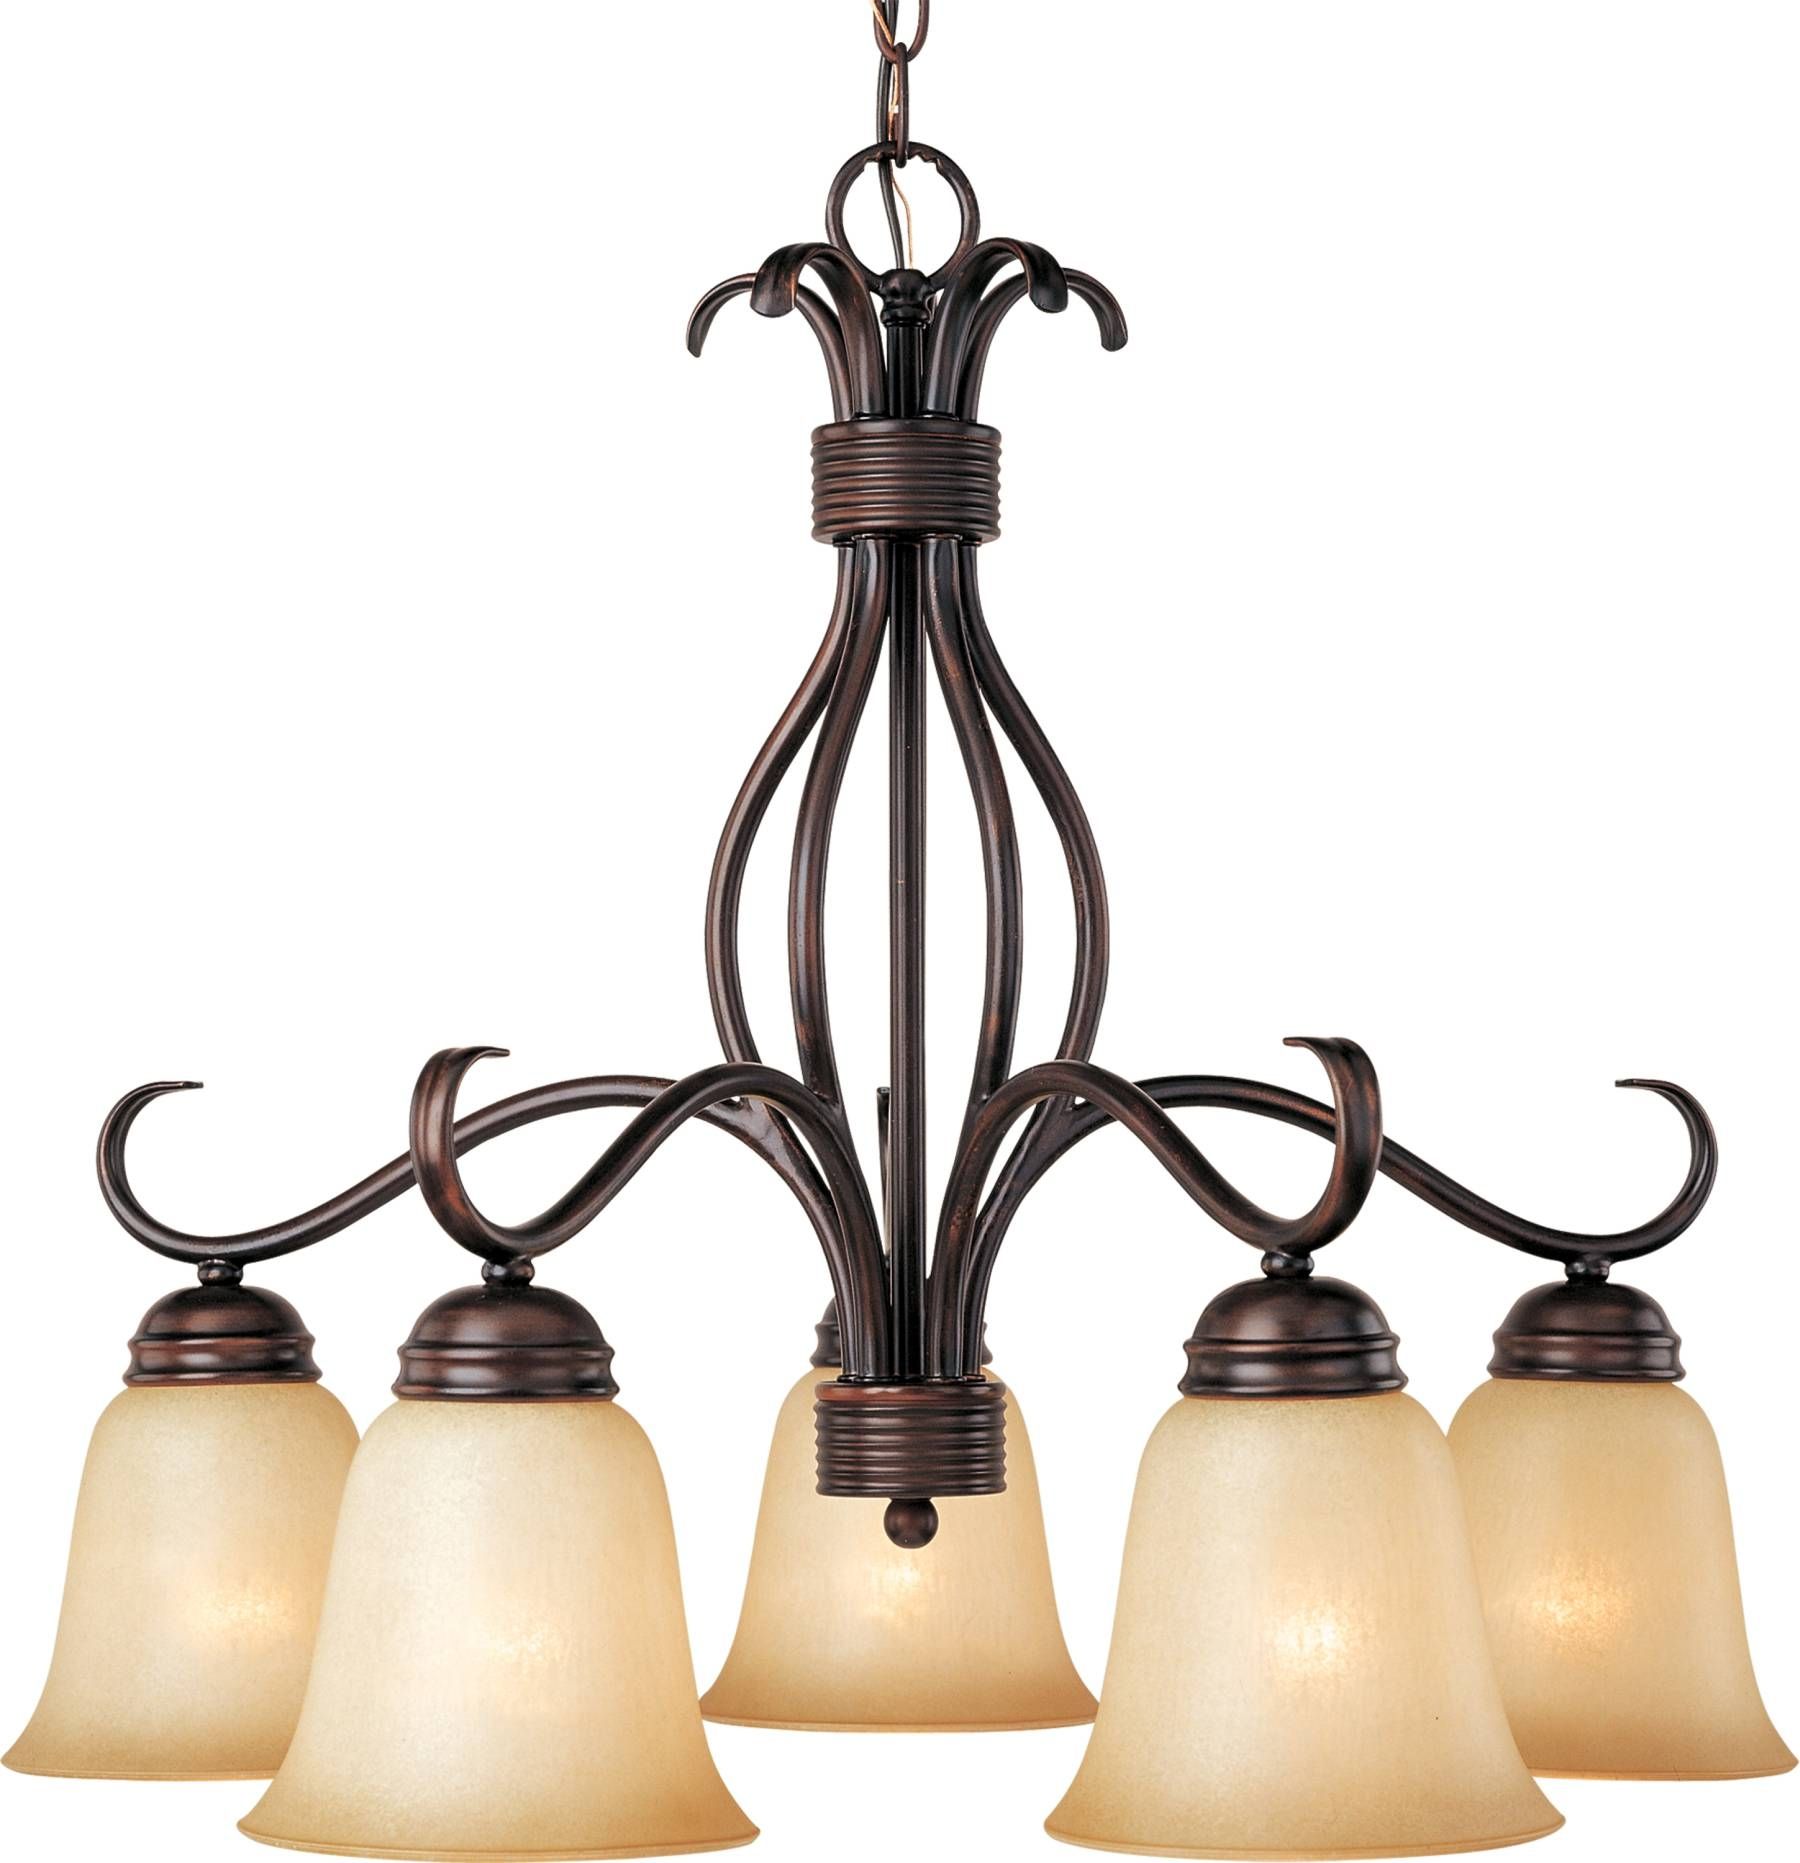 Old And Vintage Hanging Cast Iron Chandeliers With White Five Throughout Cast Iron Antique Chandelier (View 10 of 12)